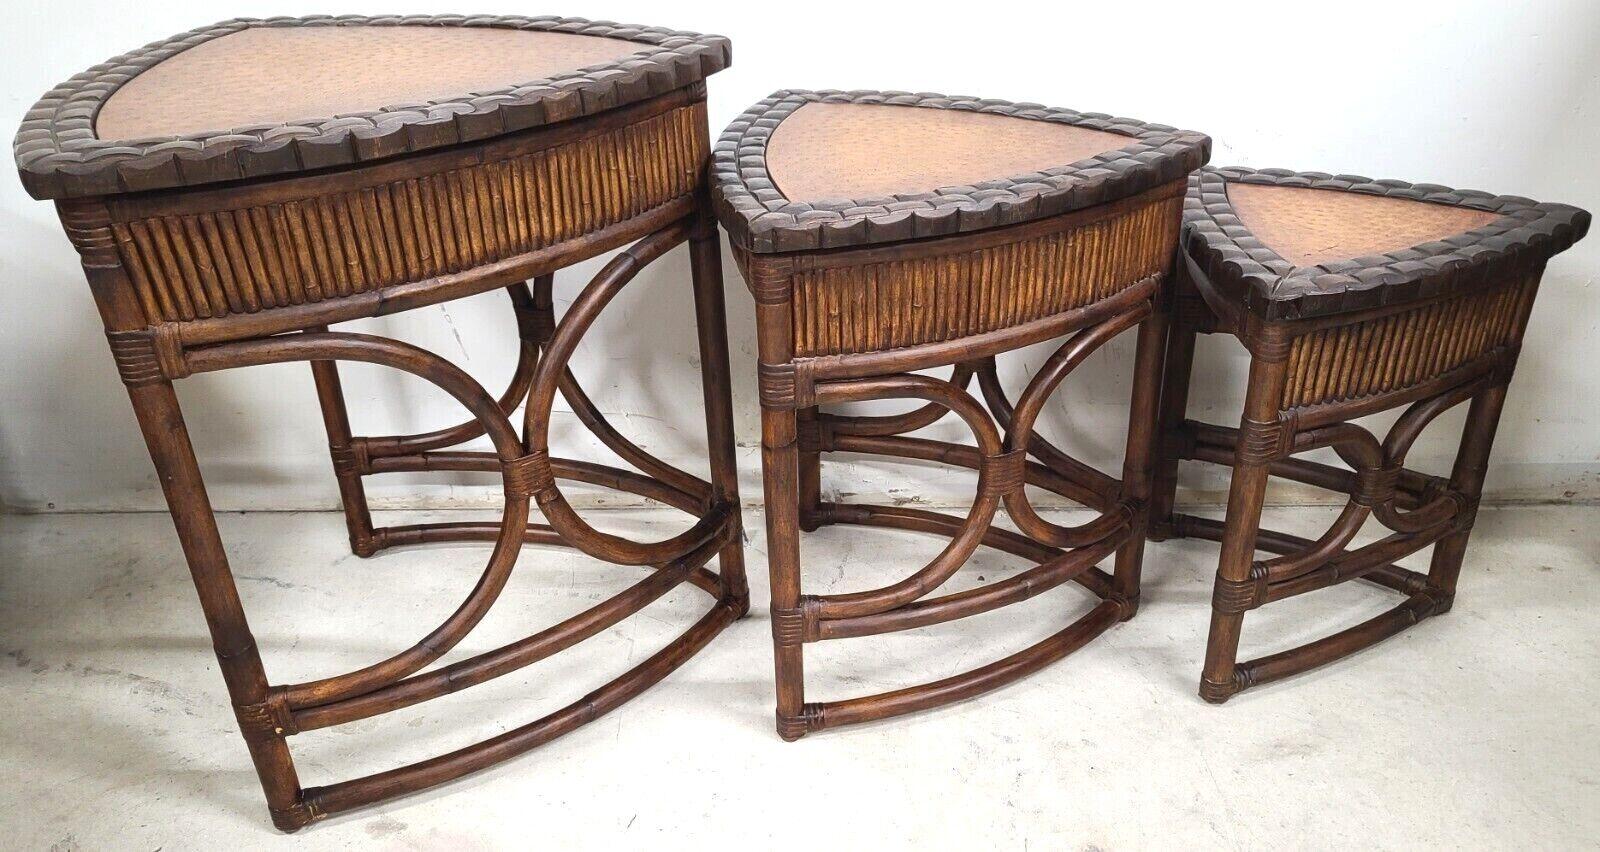 Vintage Bamboo Rattan Coconut Shell Ostrich Nesting Tables, Set of 3 For Sale 3